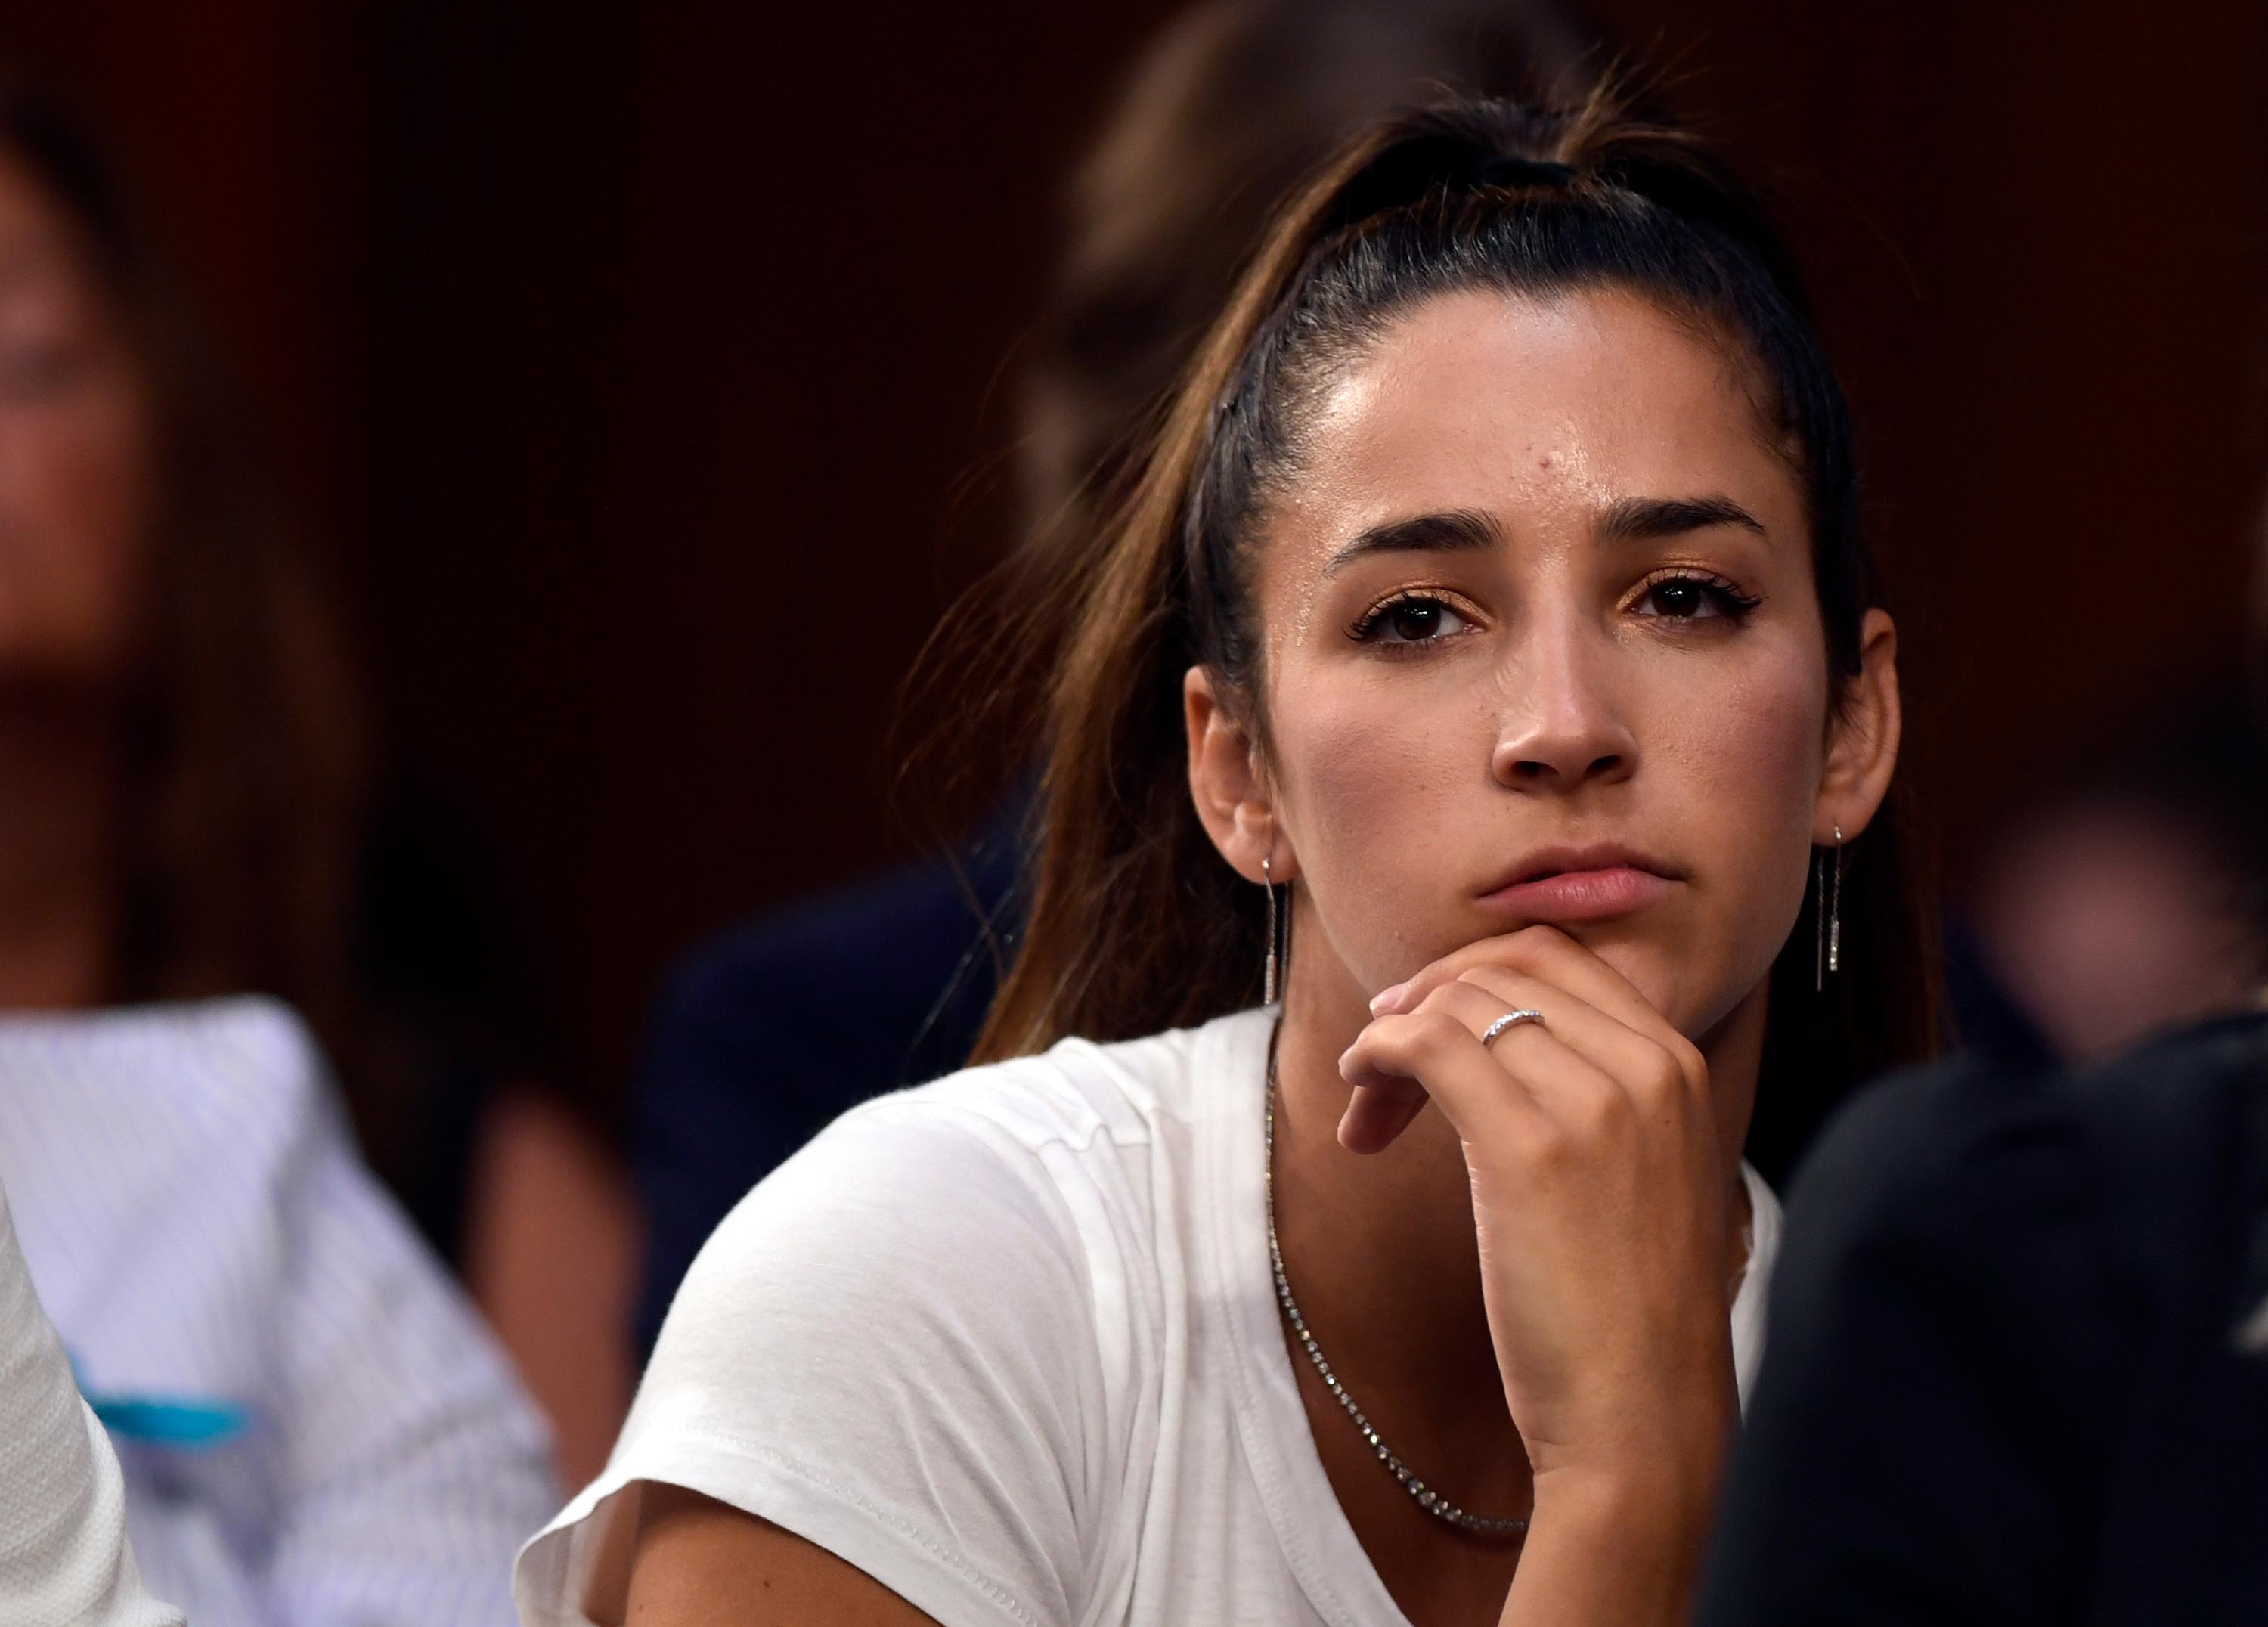 Olympic gold medalist Aly Raisman listens to testimony during a Senate Commerce subcommittee hearing in Washington, DC, July 2018.